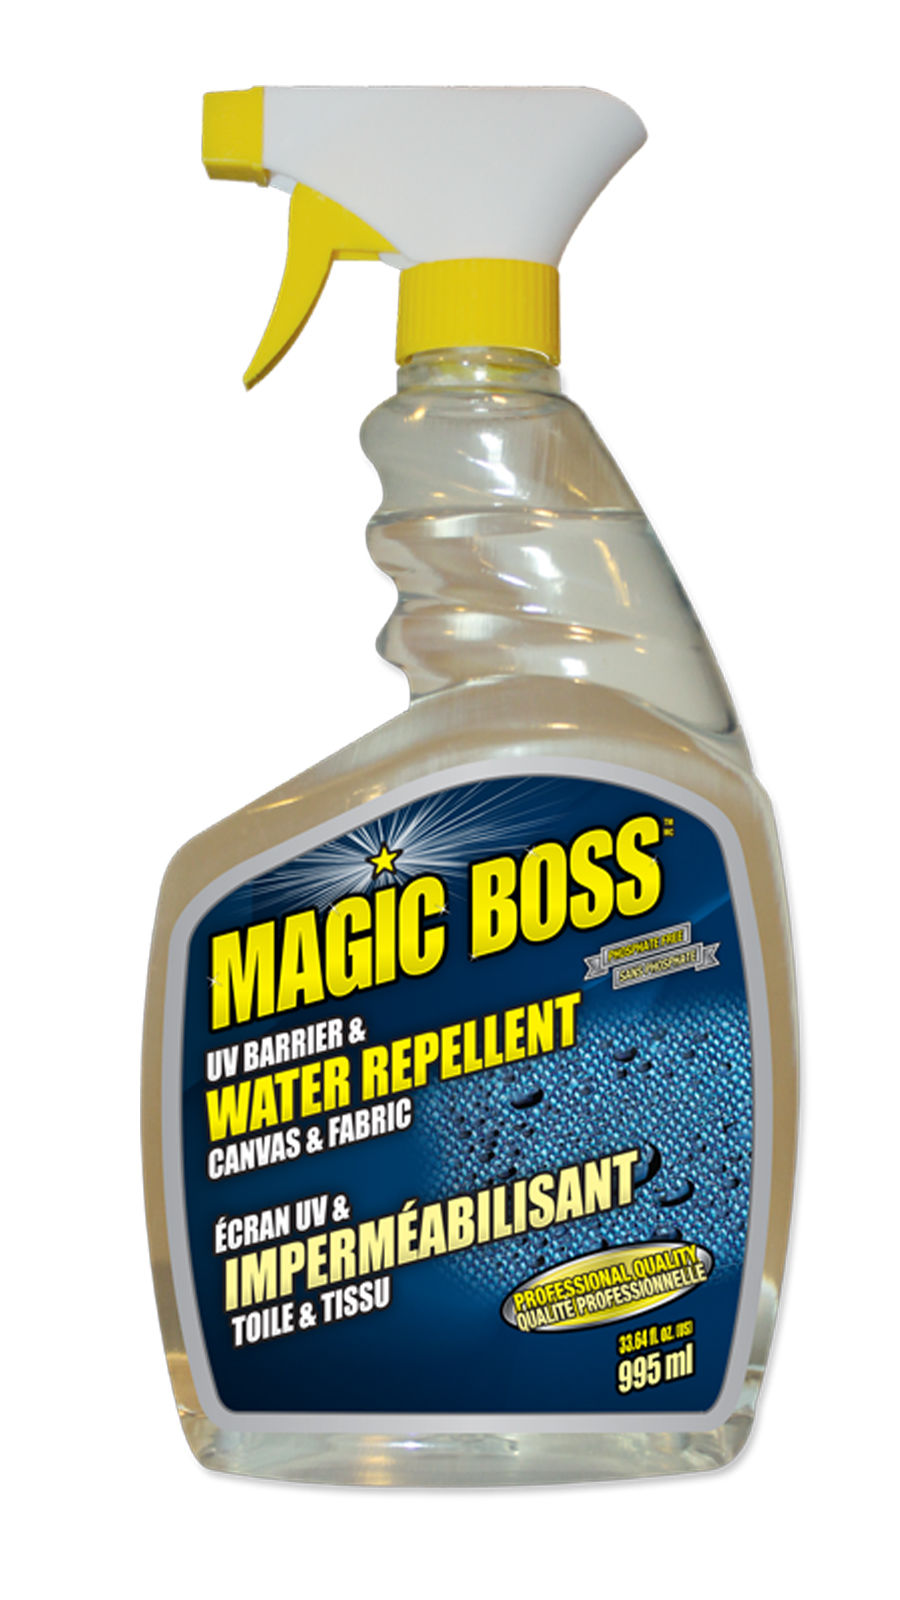 Magic Boss 1100 - Box of 12, UV Barrier & Water Repellent Canvas & Fabric (995 ml)